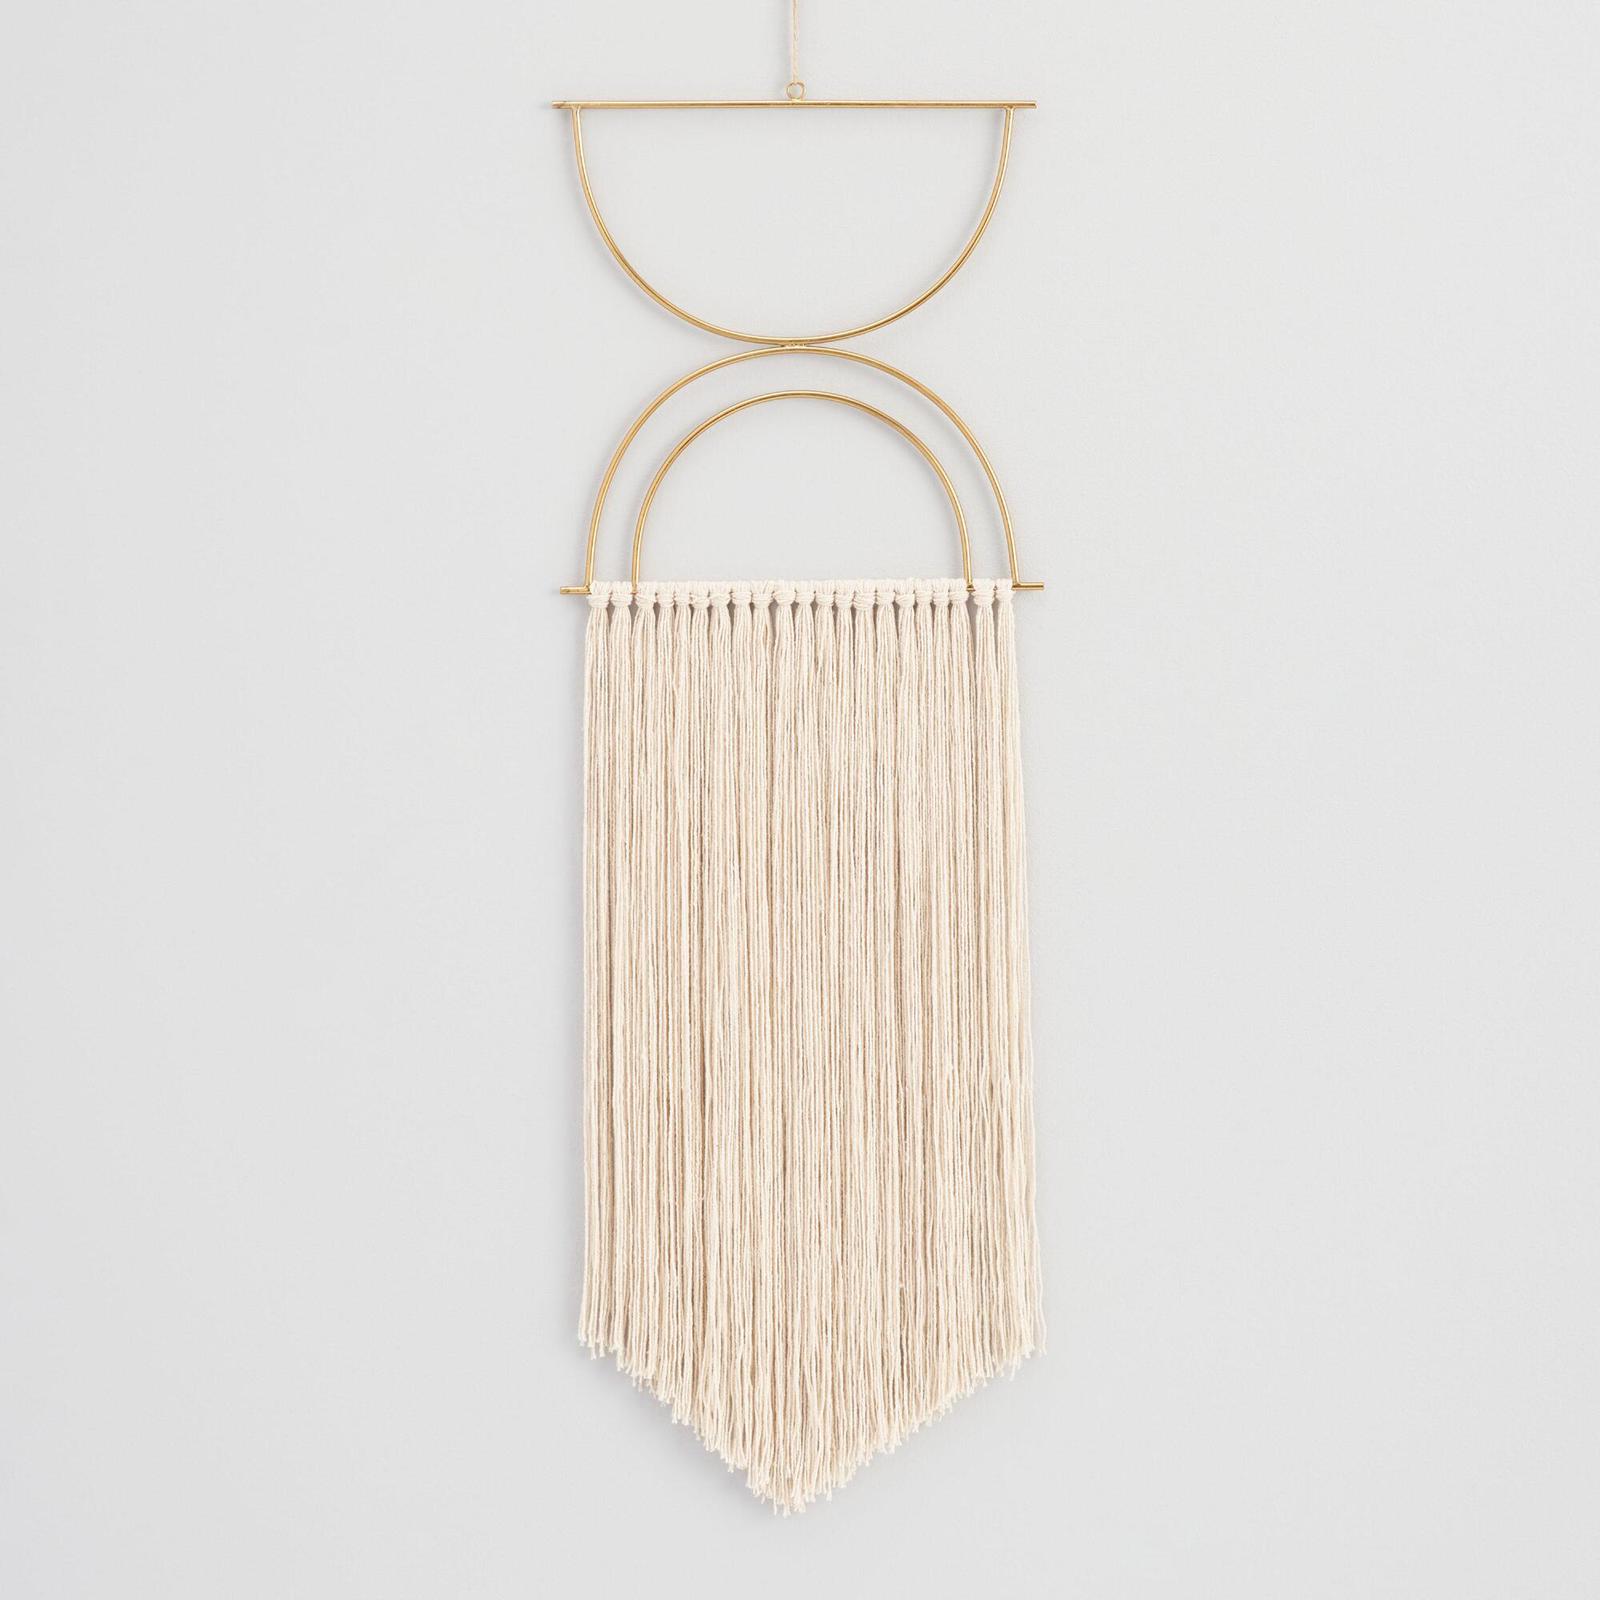 Get Fringy with Your Wall